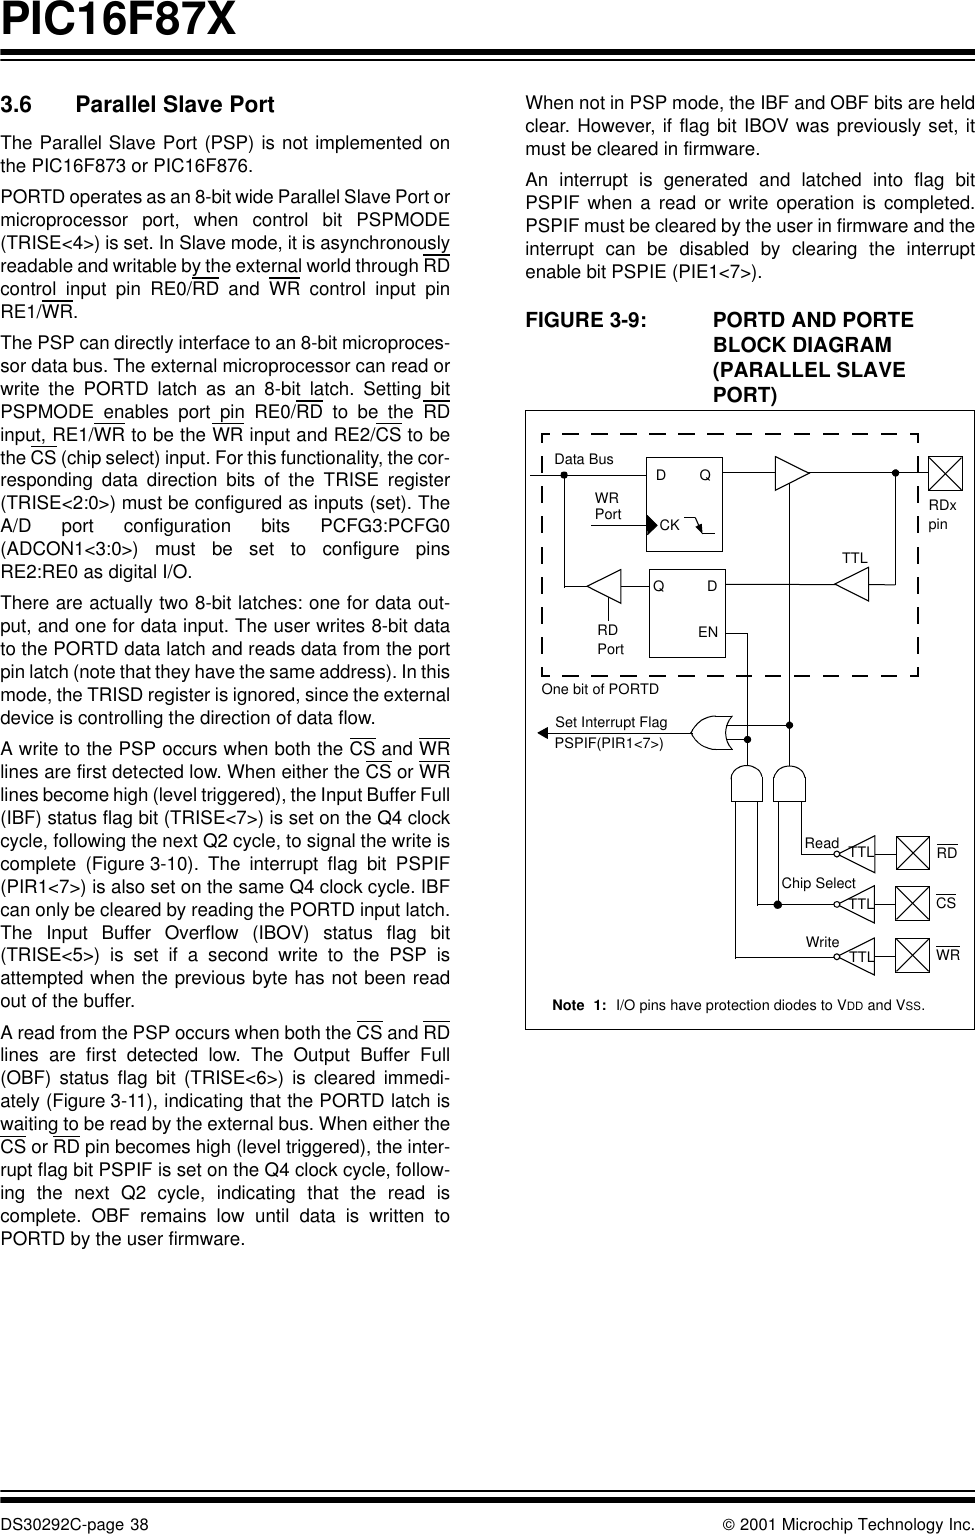 PIC16F87XDS30292C-page 38  2001 Microchip Technology Inc.3.6 Parallel Slave PortThe Parallel Slave Port (PSP) is not implemented onthe PIC16F873 or PIC16F876.PORTD operates as an 8-bit wide Parallel Slave Port ormicroprocessor port, when control bit PSPMODE(TRISE&lt;4&gt;) is set. In Slave mode, it is asynchronouslyreadable and writable by the external world through RDcontrol input pin RE0/RD and WR control input pinRE1/WR.The PSP can directly interface to an 8-bit microproces-sor data bus. The external microprocessor can read orwrite the PORTD latch as an 8-bit latch. Setting bitPSPMODE enables port pin RE0/RD to be the RDinput, RE1/WR to be the WR input and RE2/CS to bethe CS (chip select) input. For this functionality, the cor-responding data direction bits of the TRISE register(TRISE&lt;2:0&gt;) must be configured as inputs (set). TheA/D port configuration bits PCFG3:PCFG0(ADCON1&lt;3:0&gt;) must be set to configure pinsRE2:RE0 as digital I/O. There are actually two 8-bit latches: one for data out-put, and one for data input. The user writes 8-bit datato the PORTD data latch and reads data from the portpin latch (note that they have the same address). In thismode, the TRISD register is ignored, since the externaldevice is controlling the direction of data flow.A write to the PSP occurs when both the CS and WRlines are first detected low. When either the CS or WRlines become high (level triggered), the Input Buffer Full(IBF) status flag bit (TRISE&lt;7&gt;) is set on the Q4 clockcycle, following the next Q2 cycle, to signal the write iscomplete (Figure 3-10). The interrupt flag bit PSPIF(PIR1&lt;7&gt;) is also set on the same Q4 clock cycle. IBFcan only be cleared by reading the PORTD input latch.The Input Buffer Overflow (IBOV) status flag bit(TRISE&lt;5&gt;) is set if a second write to the PSP isattempted when the previous byte has not been readout of the buffer.A read from the PSP occurs when both the CS and RDlines are first detected low. The Output Buffer Full(OBF) status flag bit (TRISE&lt;6&gt;) is cleared immedi-ately (Figure 3-11), indicating that the PORTD latch iswaiting to be read by the external bus. When either theCS or RD pin becomes high (level triggered), the inter-rupt flag bit PSPIF is set on the Q4 clock cycle, follow-ing the next Q2 cycle, indicating that the read iscomplete. OBF remains low until data is written toPORTD by the user firmware.When not in PSP mode, the IBF and OBF bits are heldclear. However, if flag bit IBOV was previously set, itmust be cleared in firmware.An interrupt is generated and latched into flag bitPSPIF when a read or write operation is completed.PSPIF must be cleared by the user in firmware and theinterrupt can be disabled by clearing the interruptenable bit PSPIE (PIE1&lt;7&gt;).FIGURE 3-9: PORTD AND PORTE BLOCK DIAGRAM (PARALLEL SLAVE PORT) Data BusWRPortRDRDxQDCKENQDENPortpinOne bit of PORTDSet Interrupt FlagPSPIF(PIR1&lt;7&gt;)ReadChip SelectWriteRDCSWRTTLTTLTTLTTLNote 1: I/O pins have protection diodes to VDD and VSS.